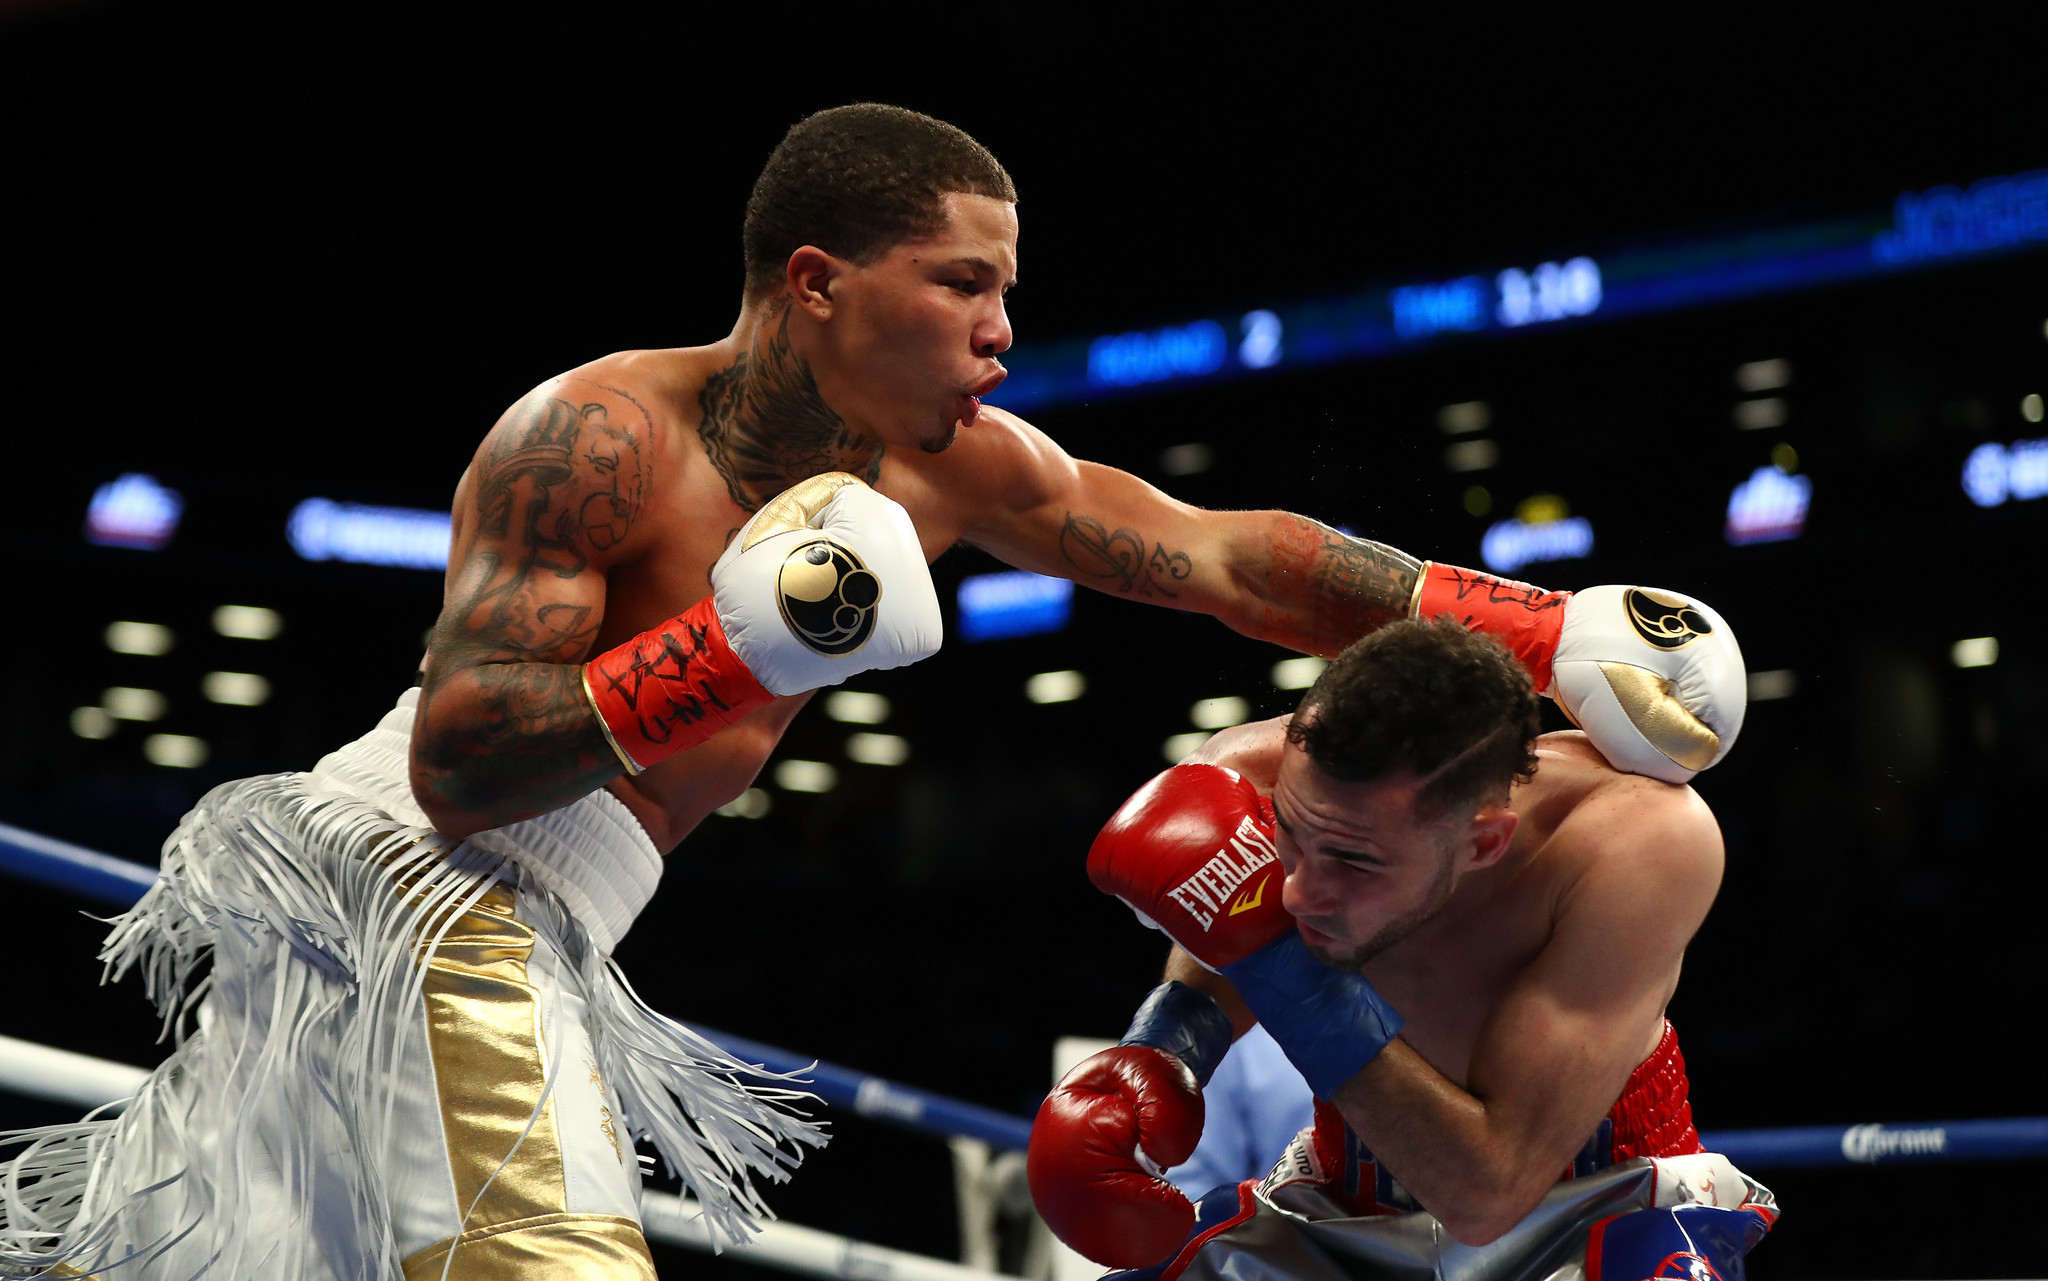 Boxing: Gervonta Davis looking to move to Lightweight division - Sports India Show2048 x 1281